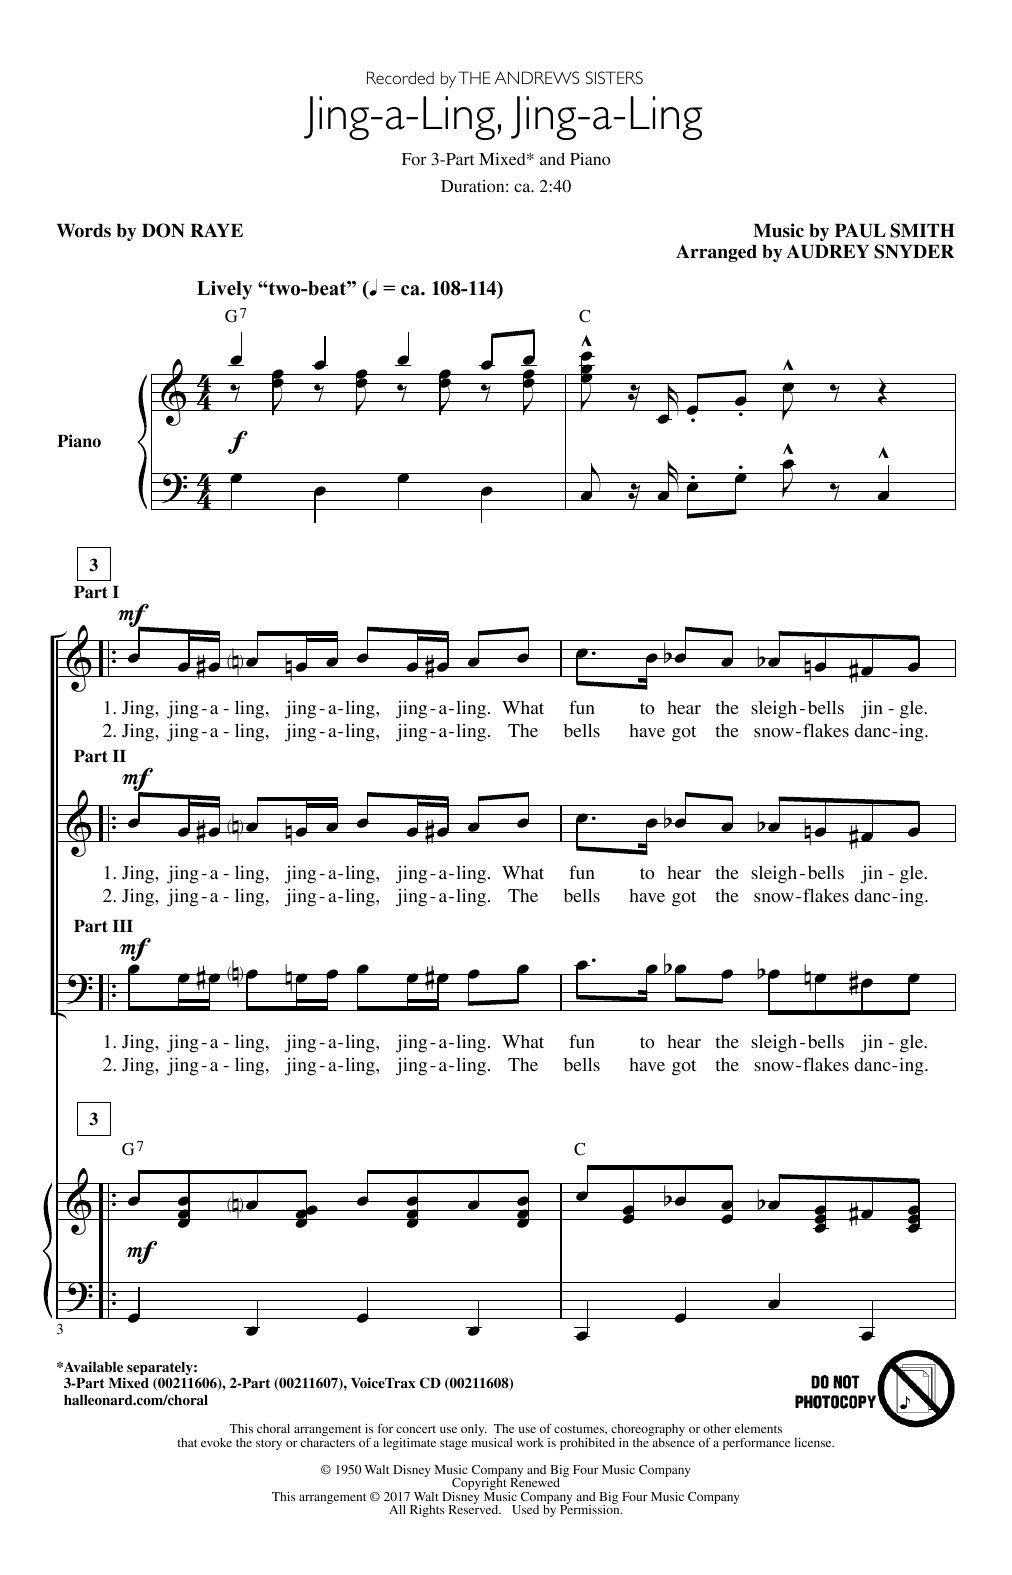 Download Audrey Snyder Jing-A-Ling, Jing-A-Ling Sheet Music